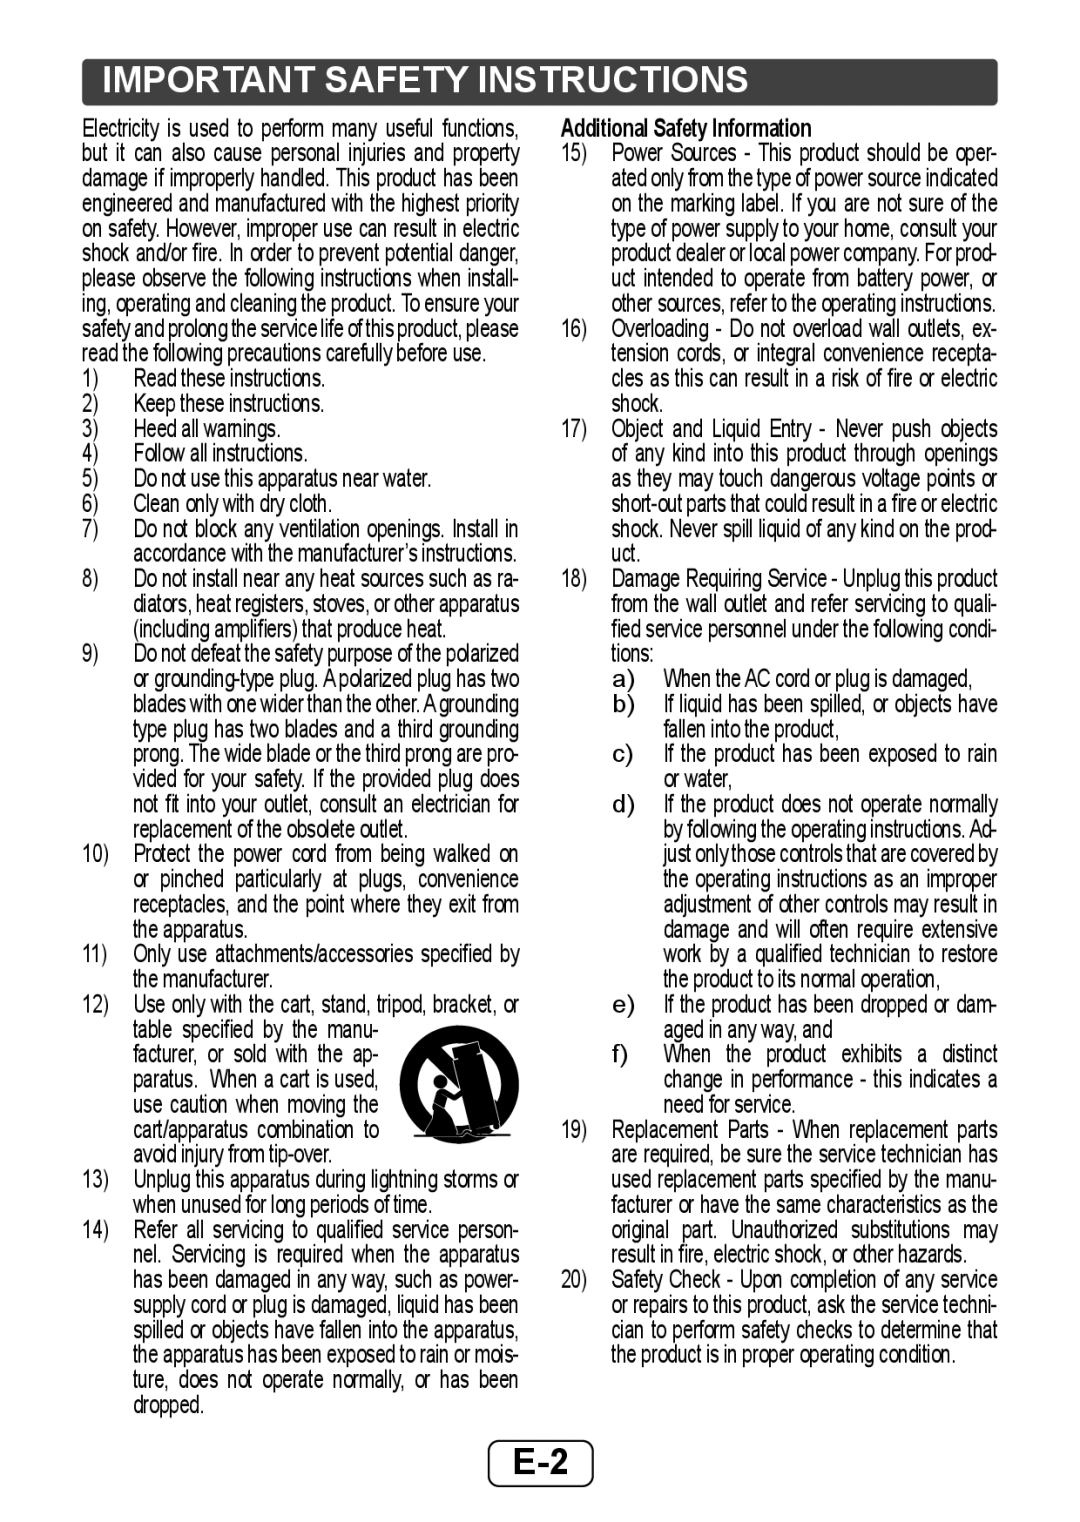 Sharp HTSB350 operation manual Important Safety Instructions, Additional Safety Information 